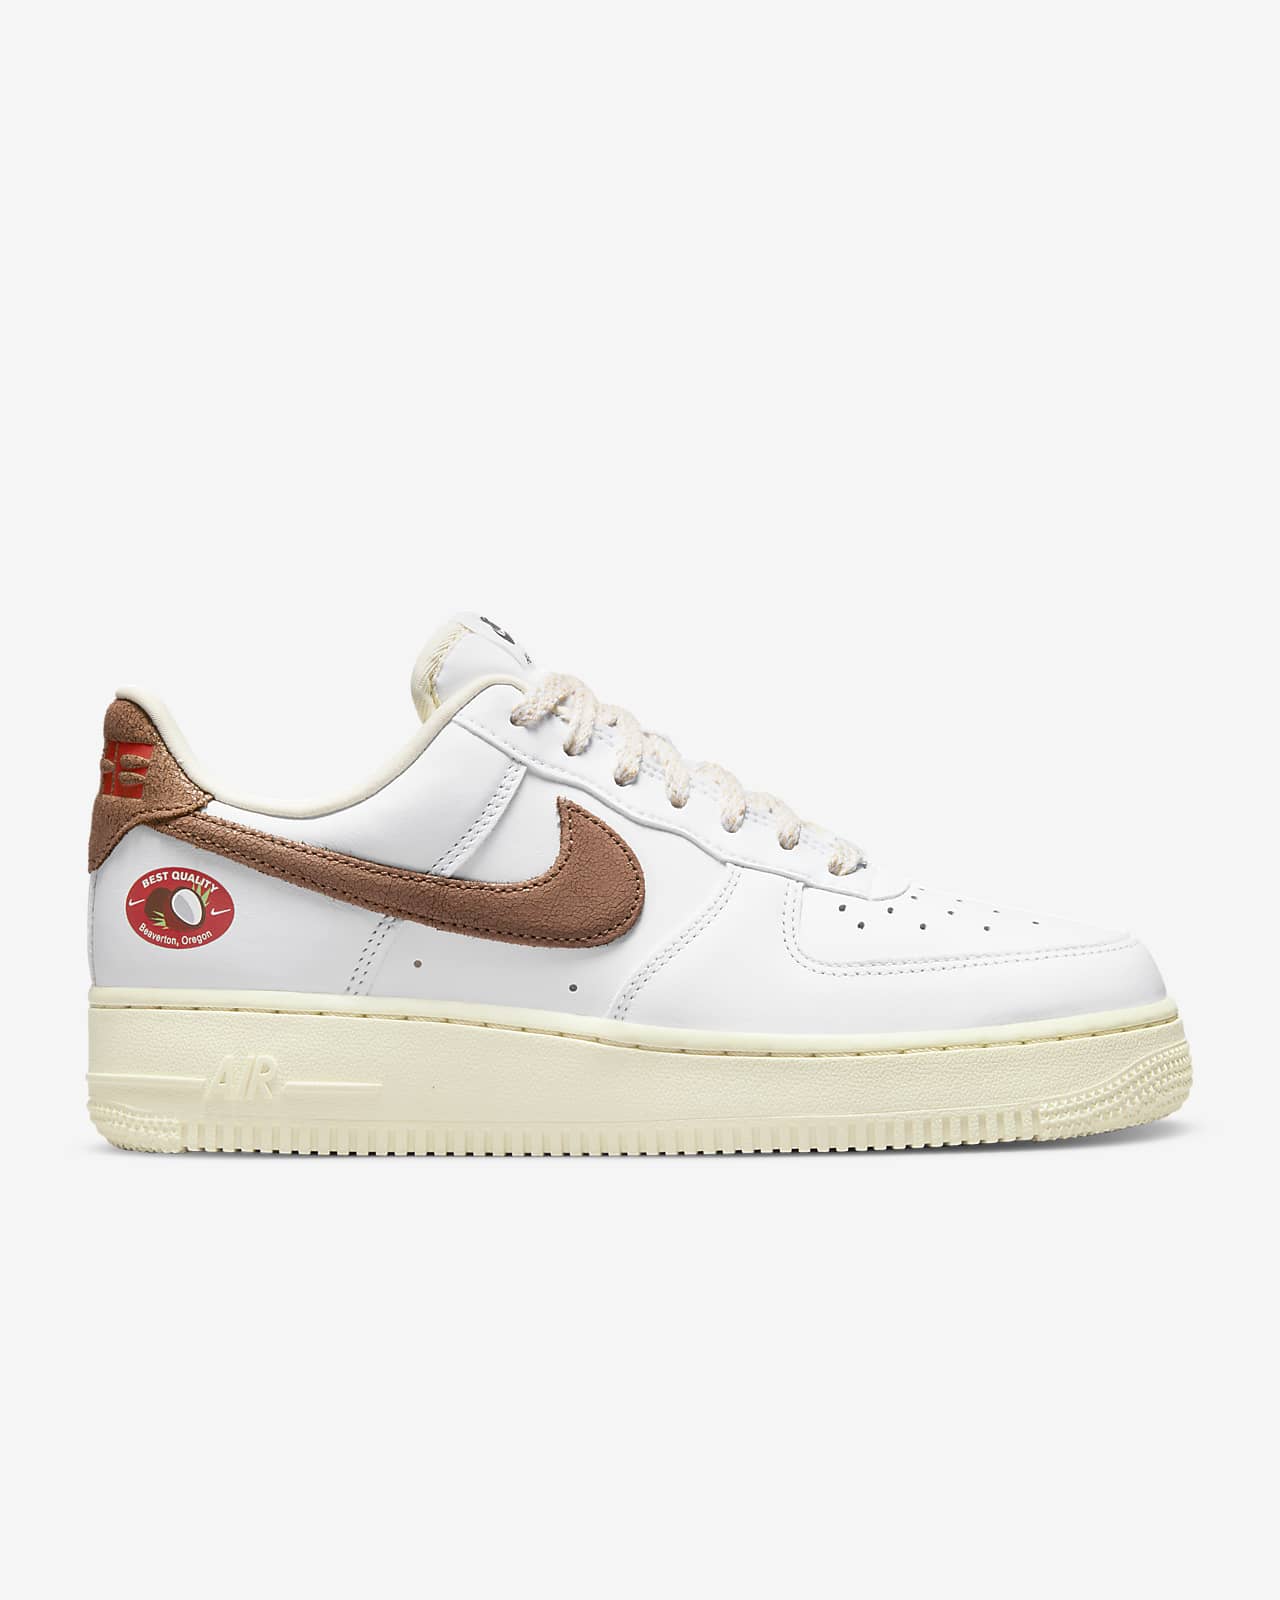 Nike Air Force 1 '07 Low Women's Shoes.